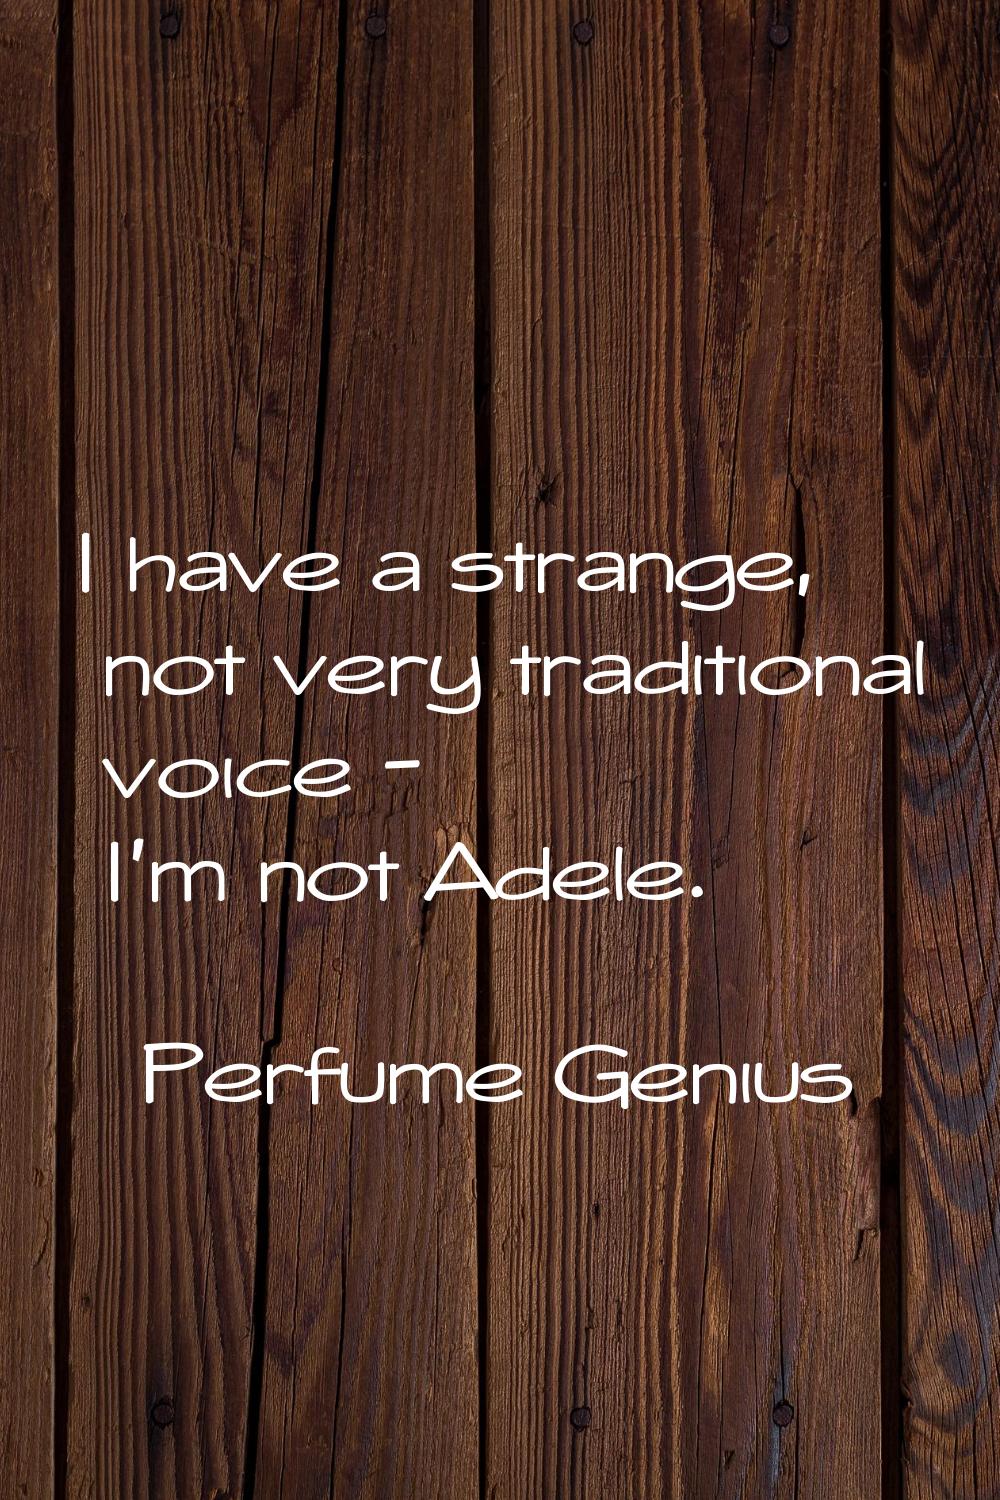 I have a strange, not very traditional voice - I'm not Adele.